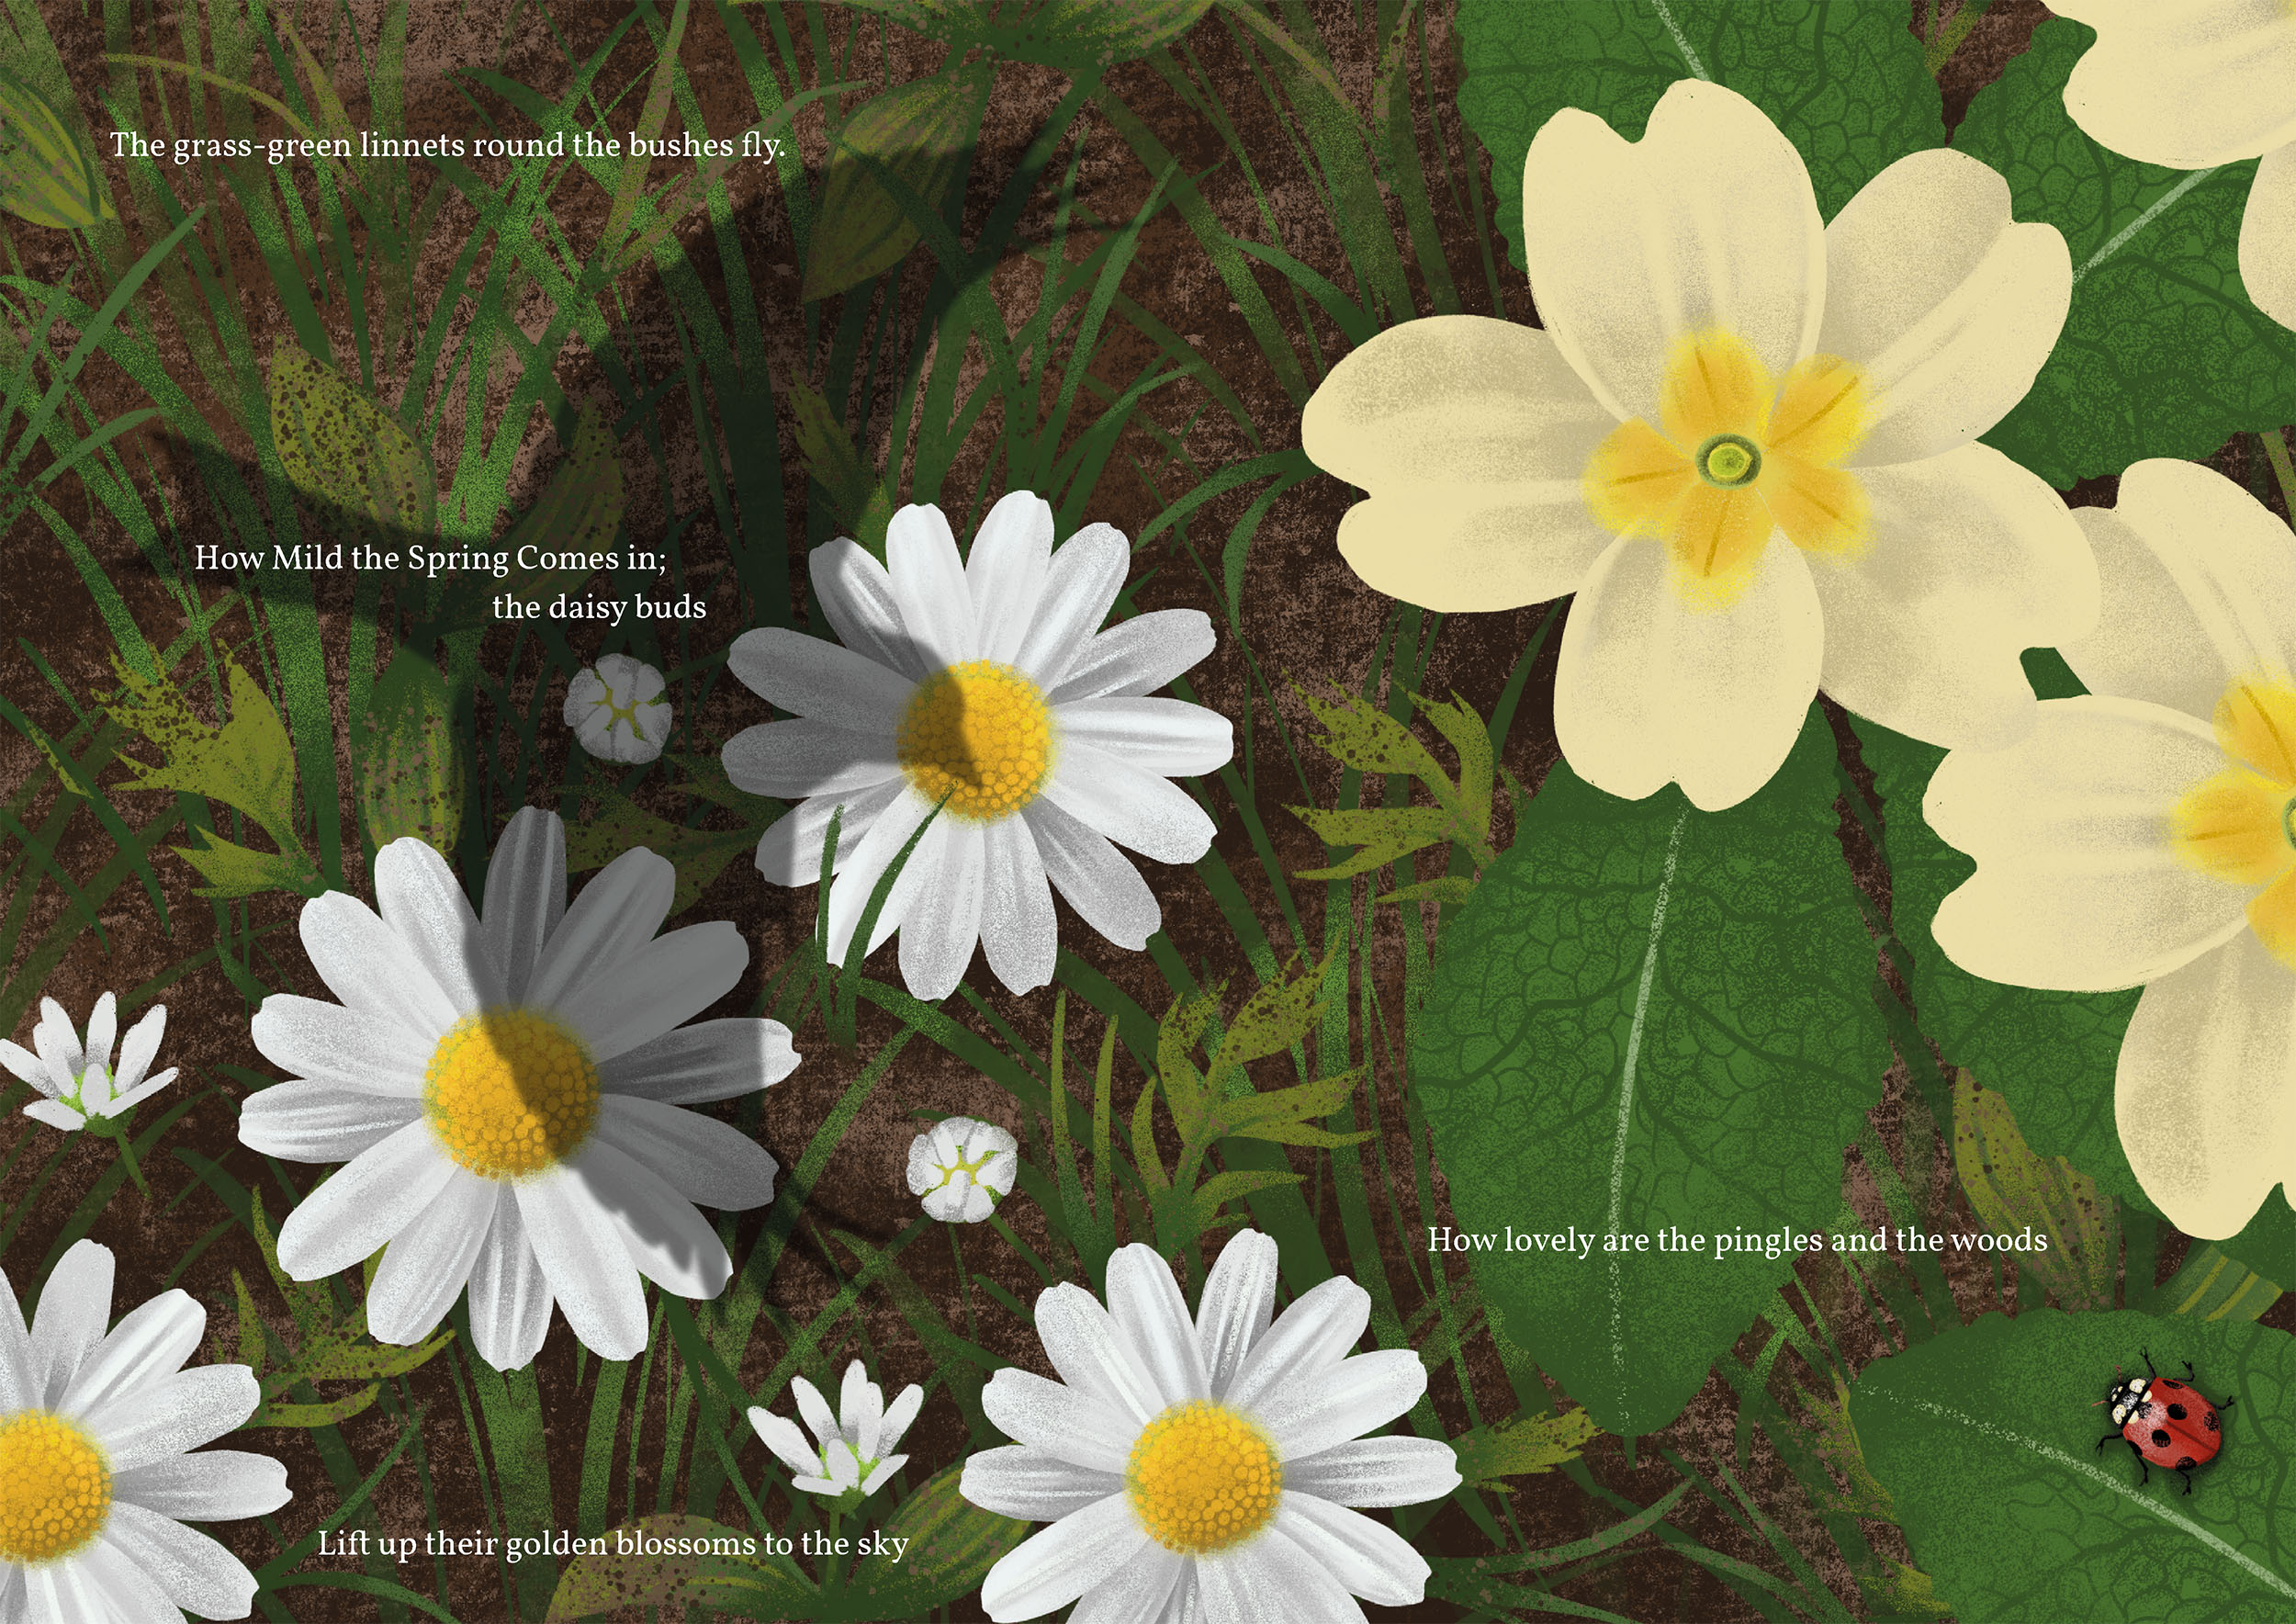 Illustrated spread of the third stanza from "On a Lane in Spring" by John Clare. Showcasing flowers and a ladybug.